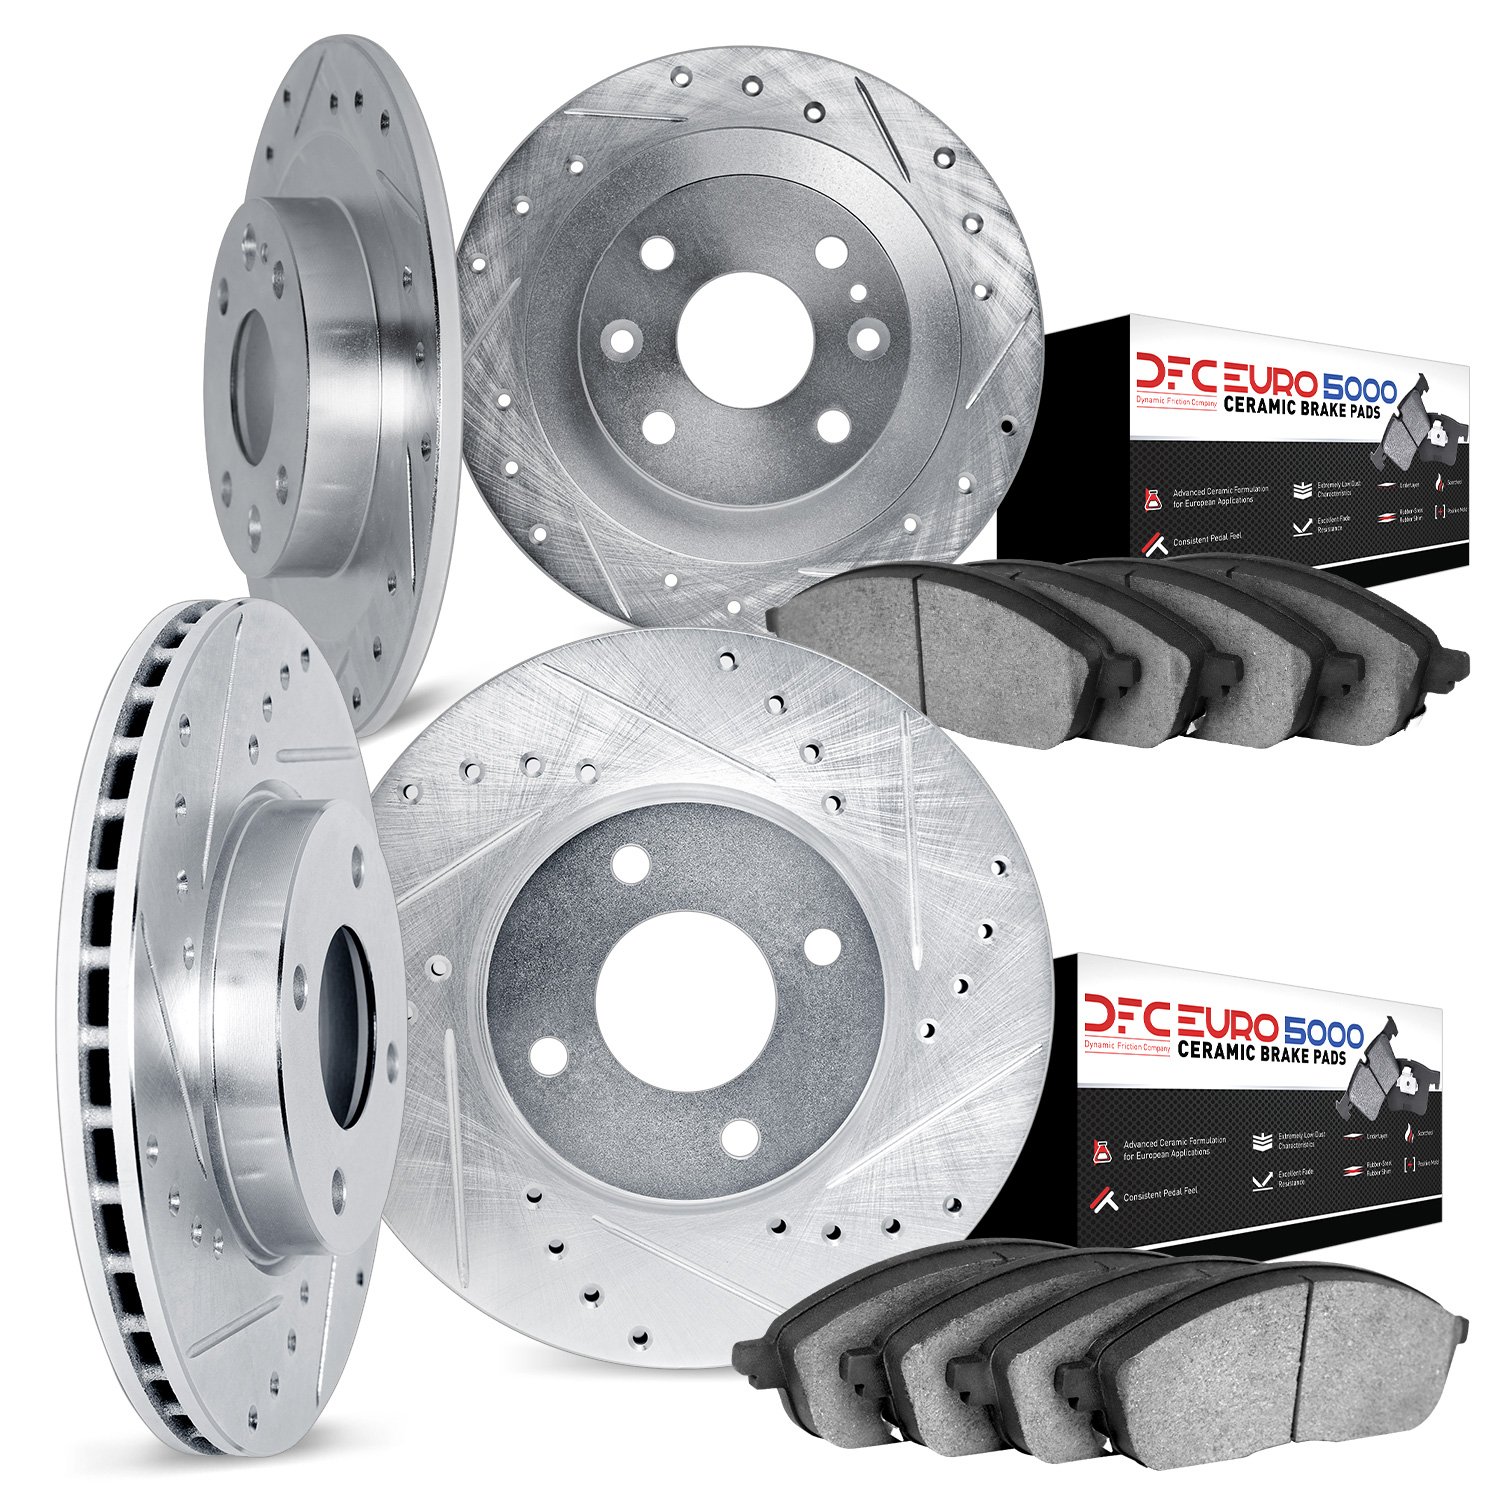 7604-20001 Drilled/Slotted Brake Rotors w/5000 Euro Ceramic Brake Pads Kit [Silver], 1983-1993 Jaguar, Position: Front and Rear